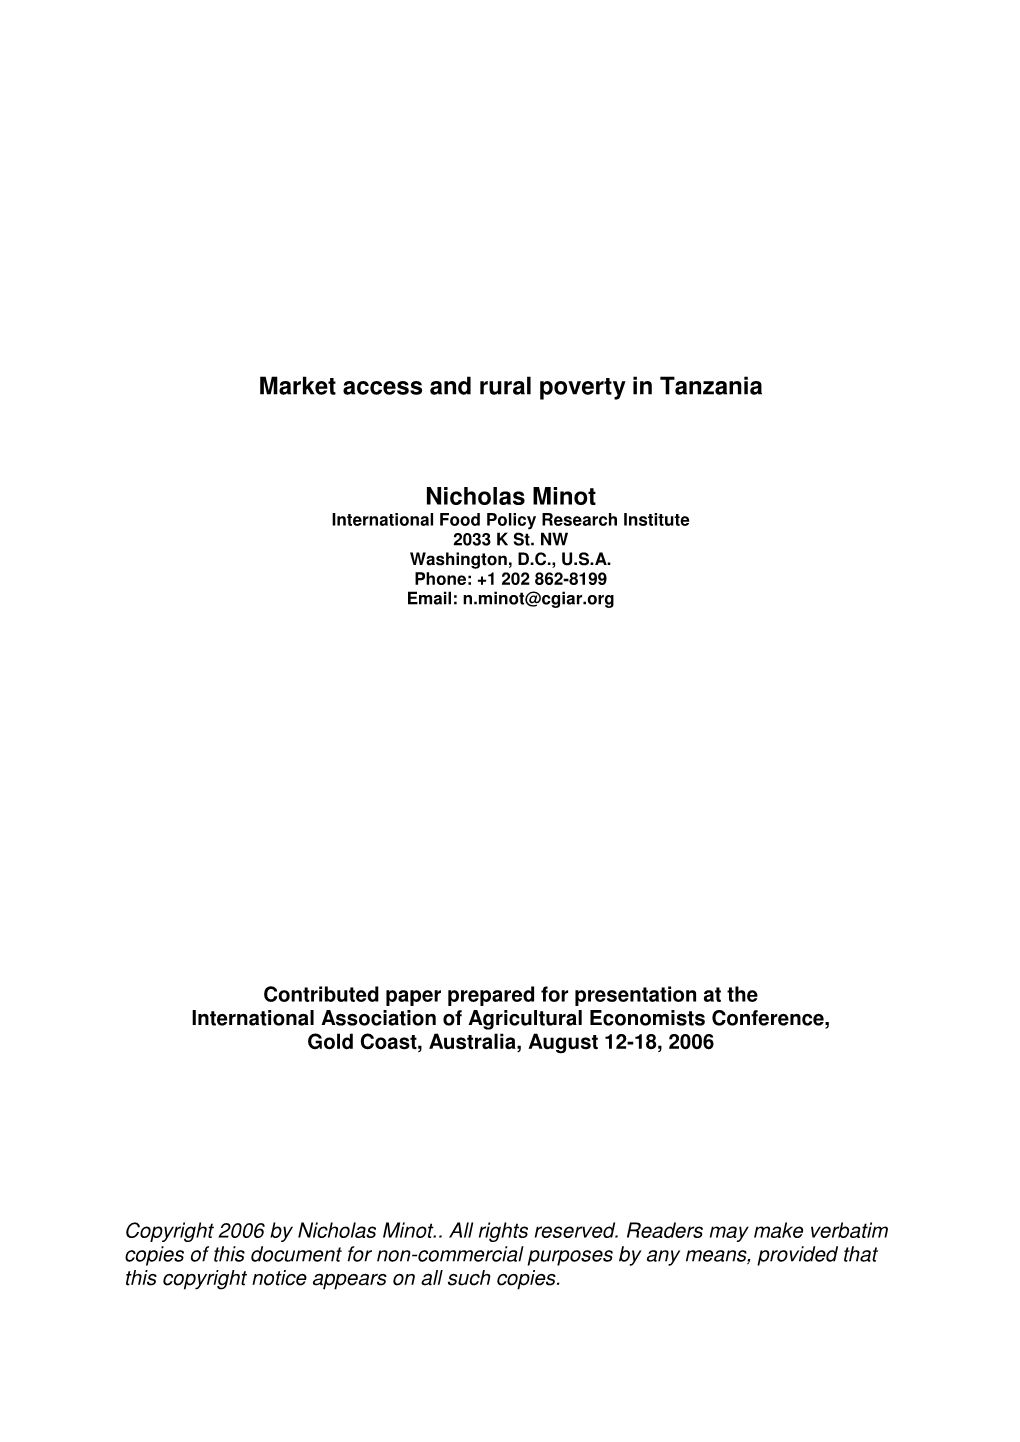 Market Access and Rural Poverty in Tanzania Nicholas Minot